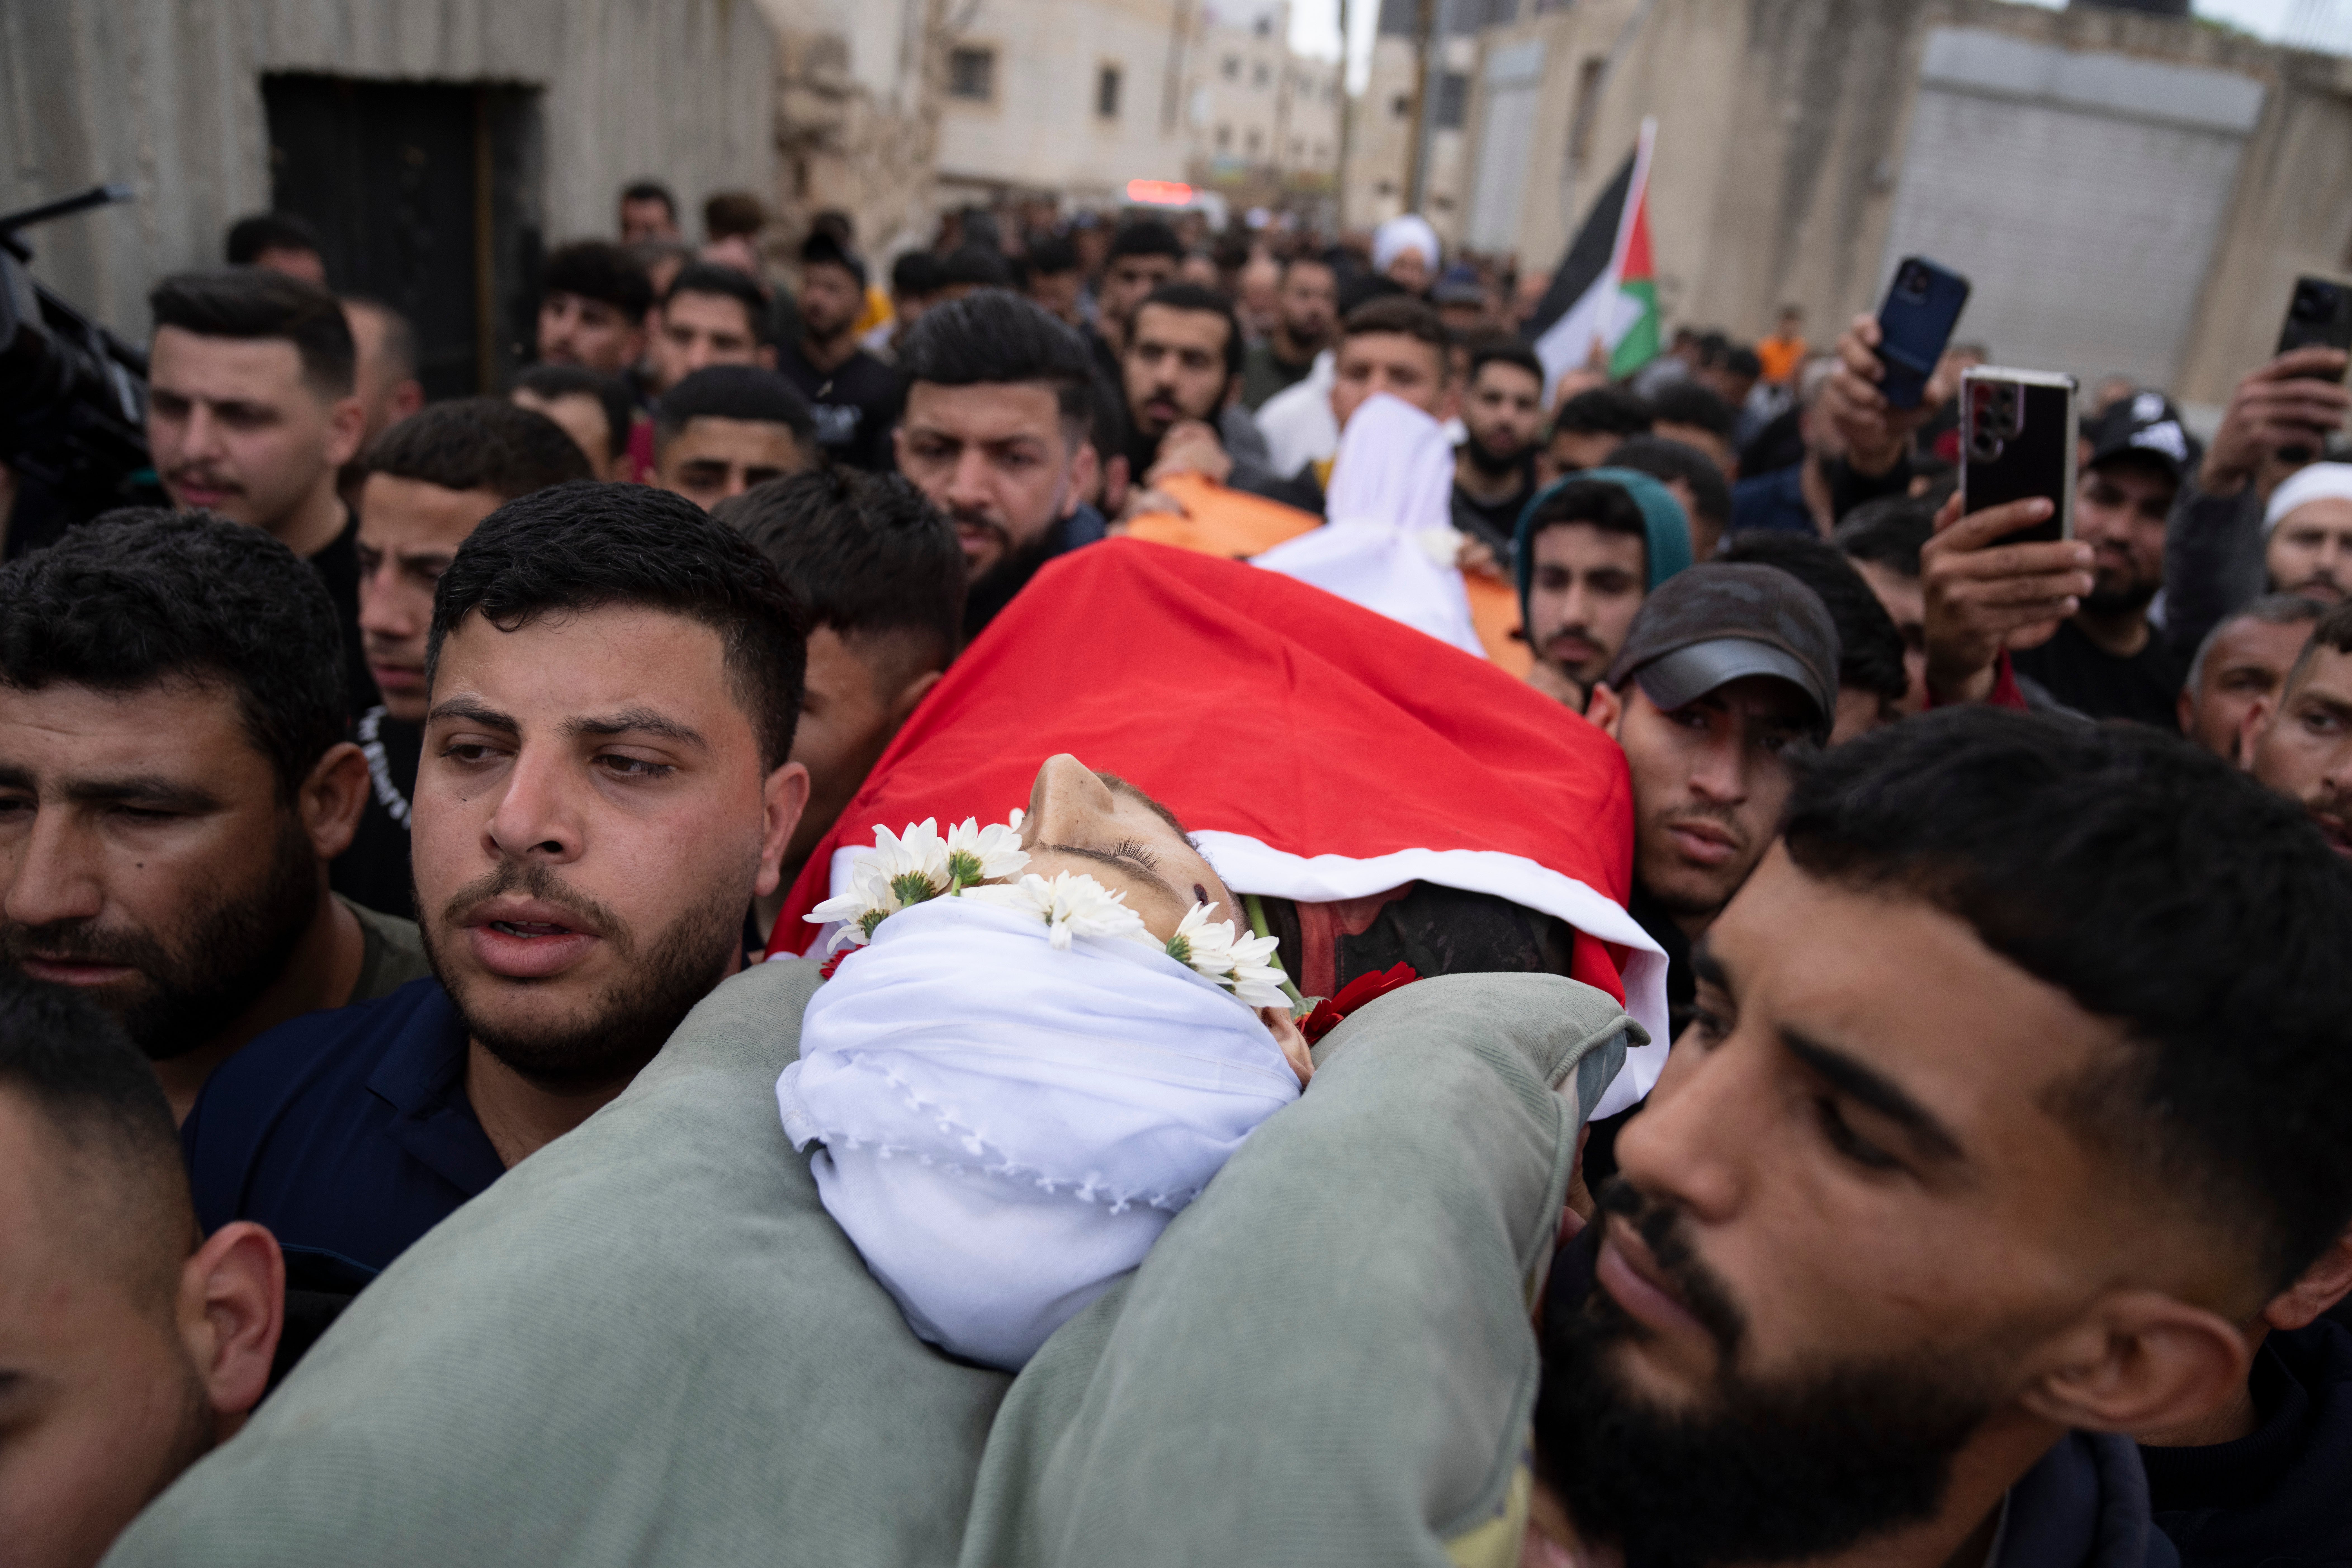 Mourners carry the body of Jehad Abu Alia, who was killed in violence following the death of an Israeli teenager